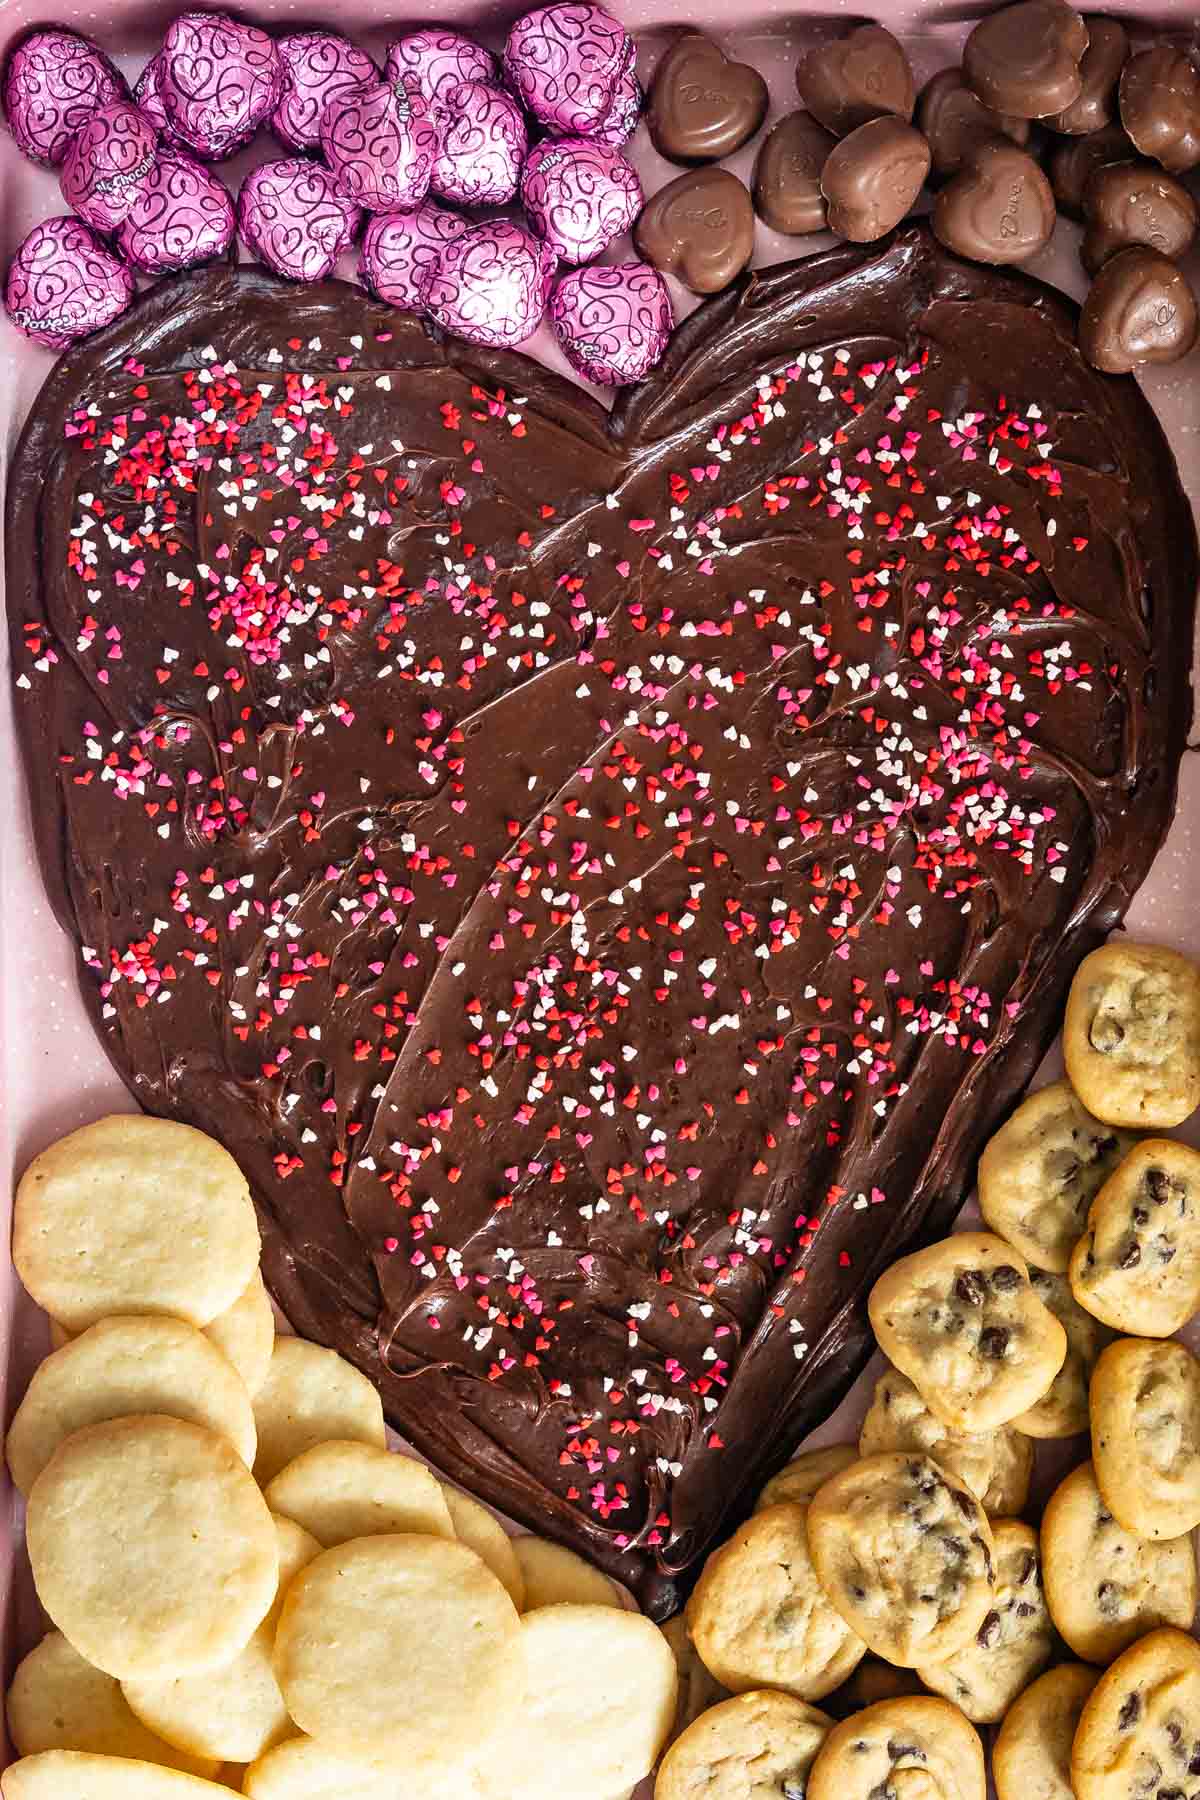 nutella spread on a pink board in the shape of a heart with candy and cookies around the edge.